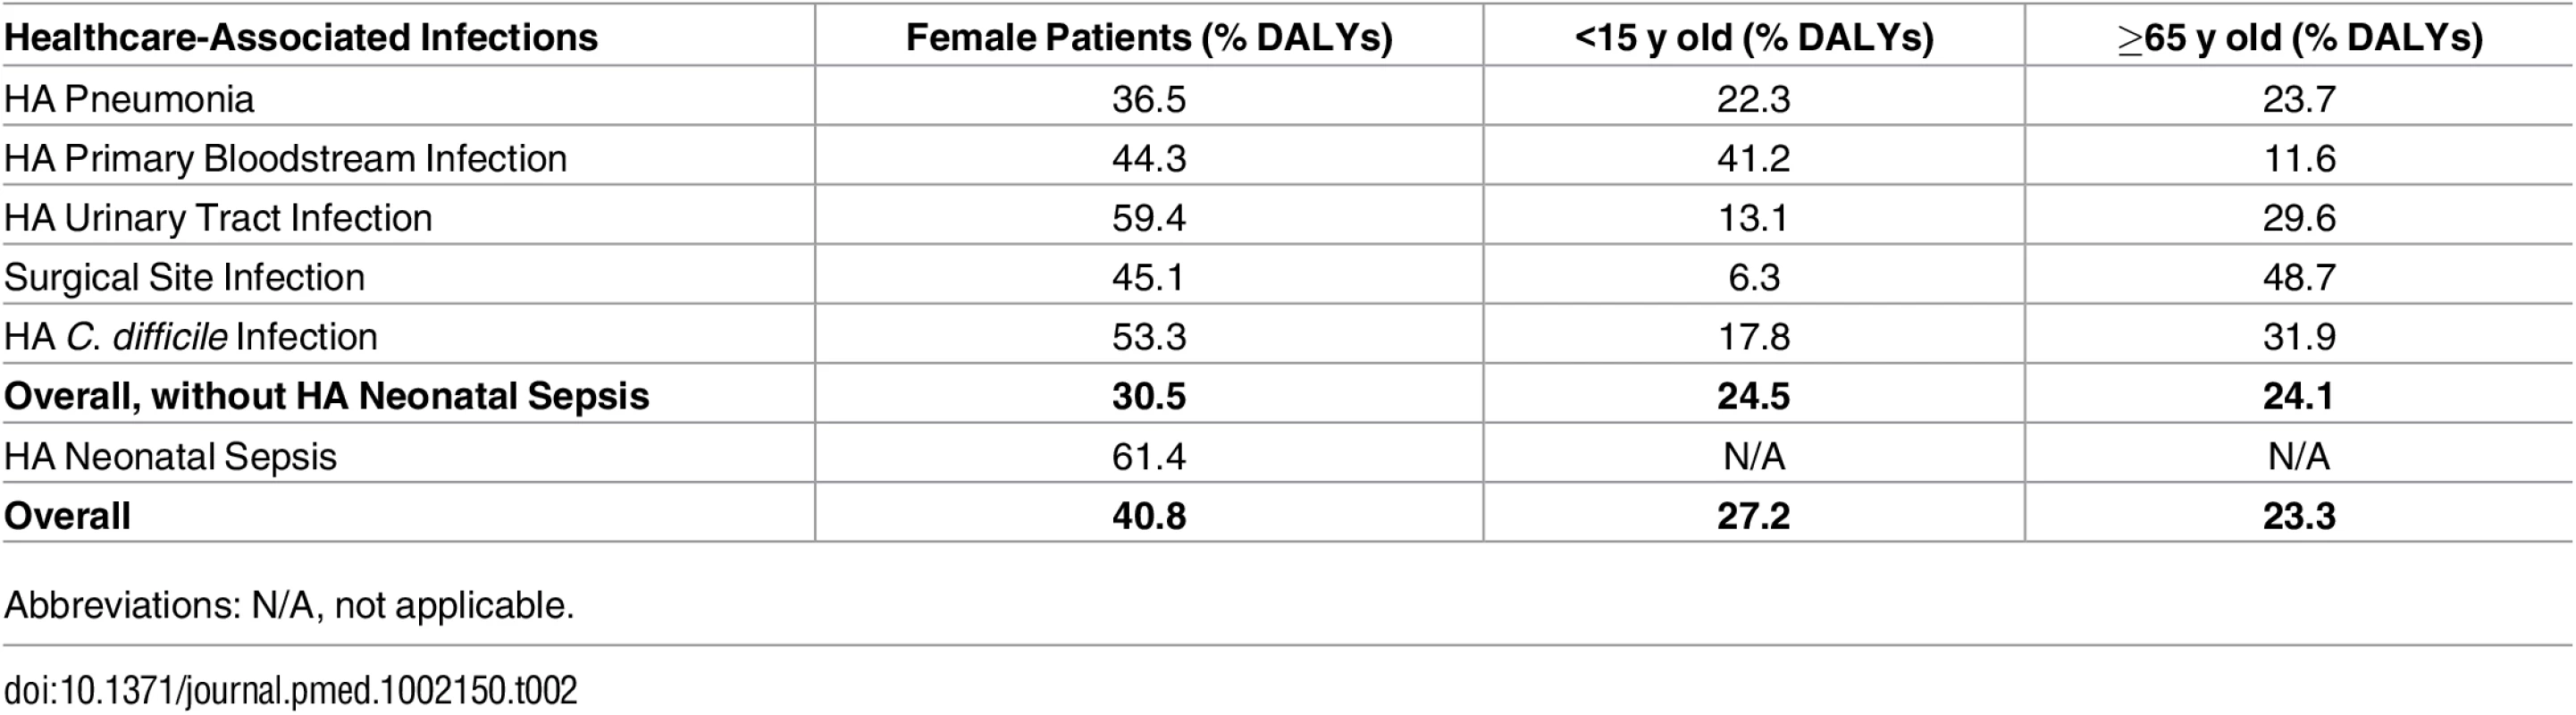 Percentage of burden of healthcare-associated infections (% DALYs) in female patients, children (&lt;15 y old), and the elderly (≥65 y old), EU/EEA, 2011–2012 (time discounting was not applied).